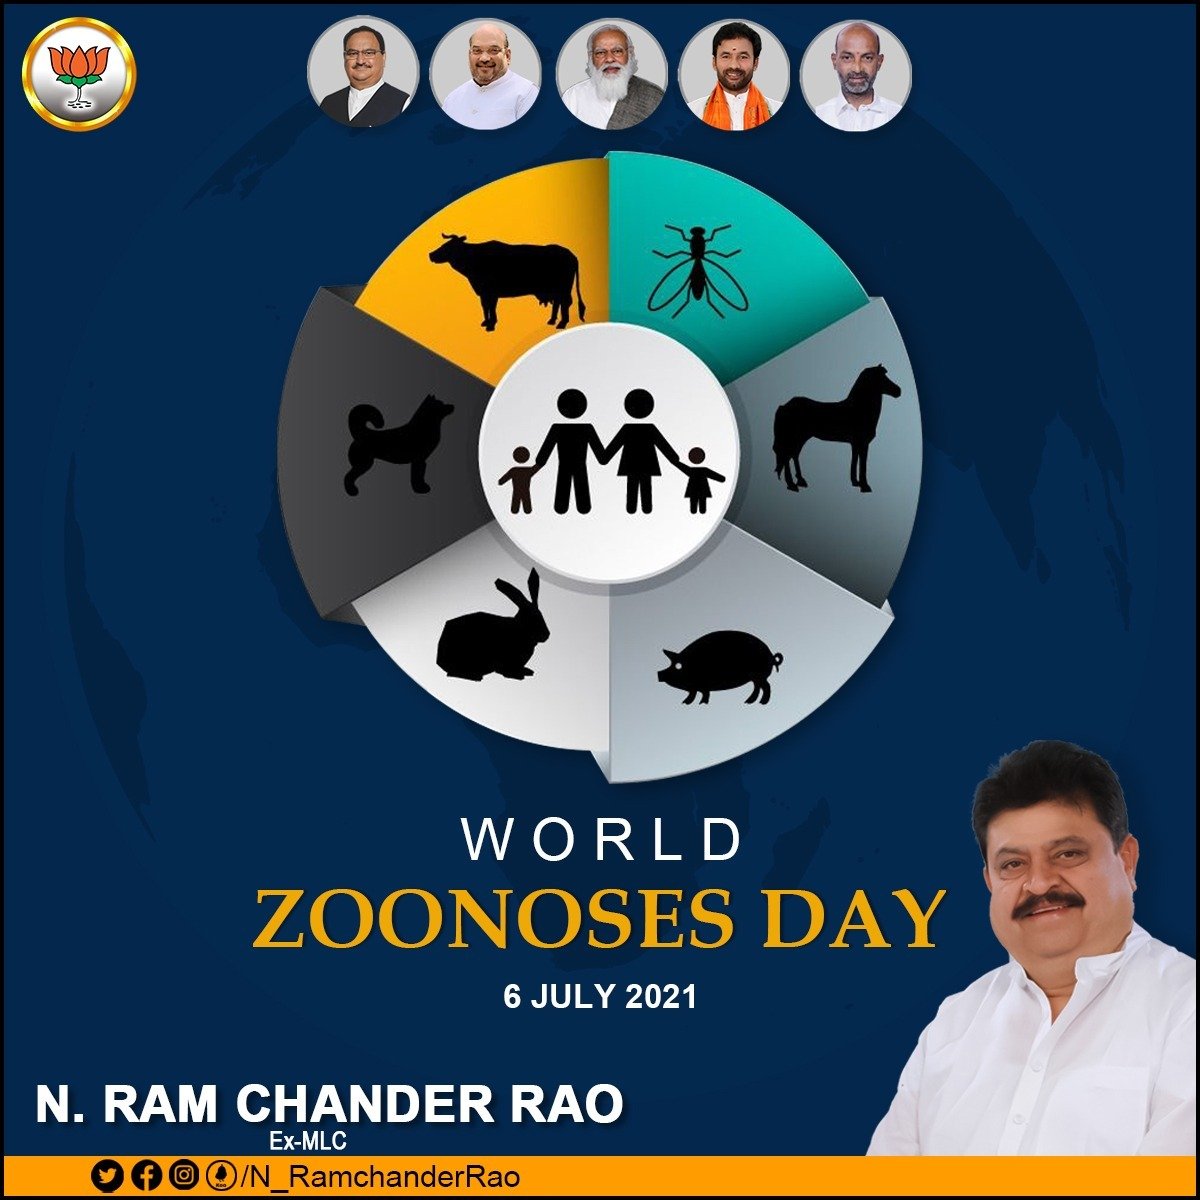 World Zoonoses Day is celebrated to make people aware of the dangers of the Zoonotic diseases and take measure to contain them. #WorldZoonosesDay